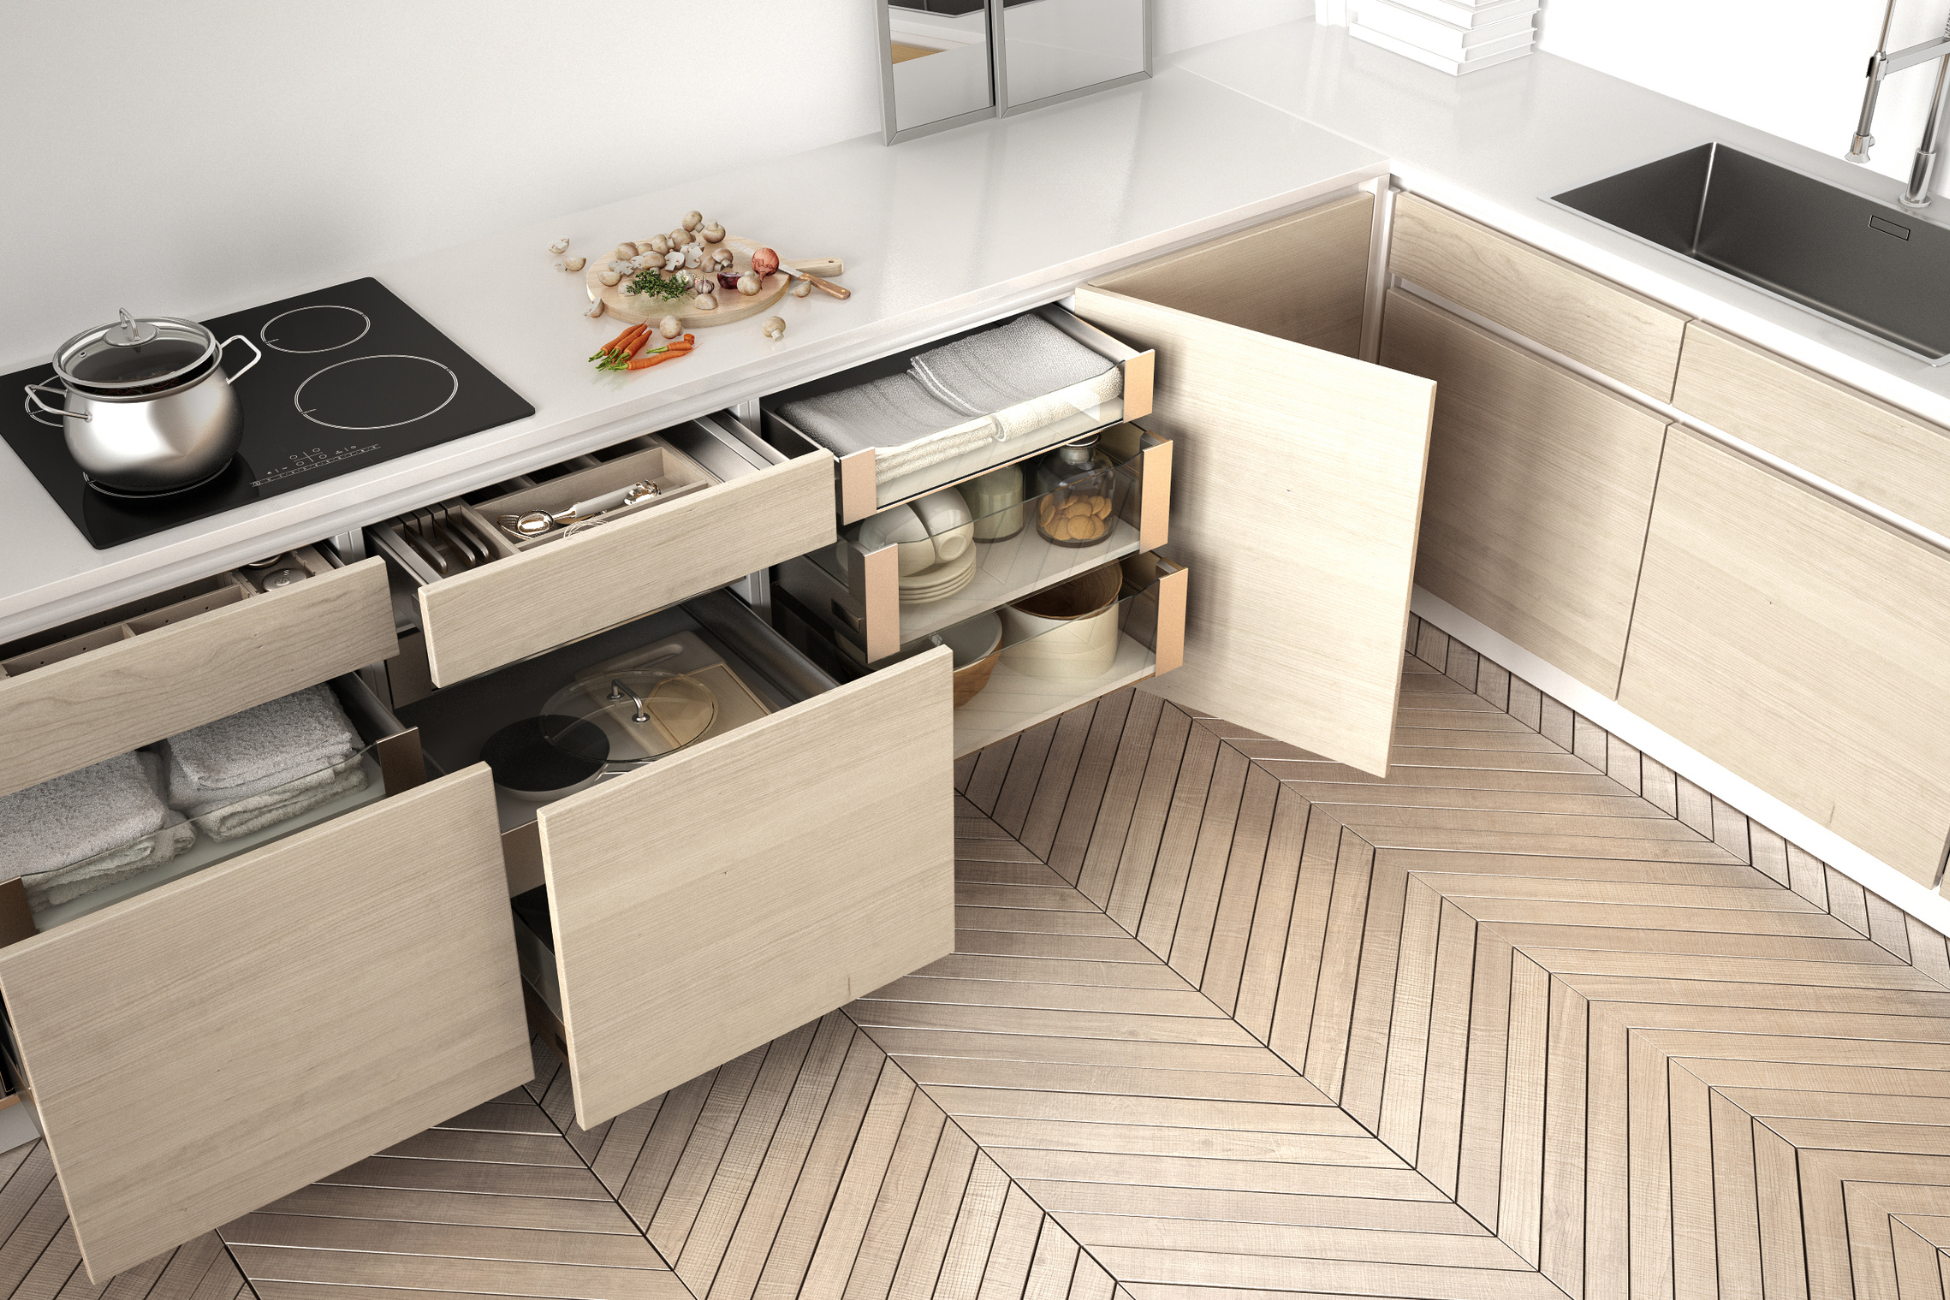 10 Clever Kitchen Storage Solutions to Maximize Your Space